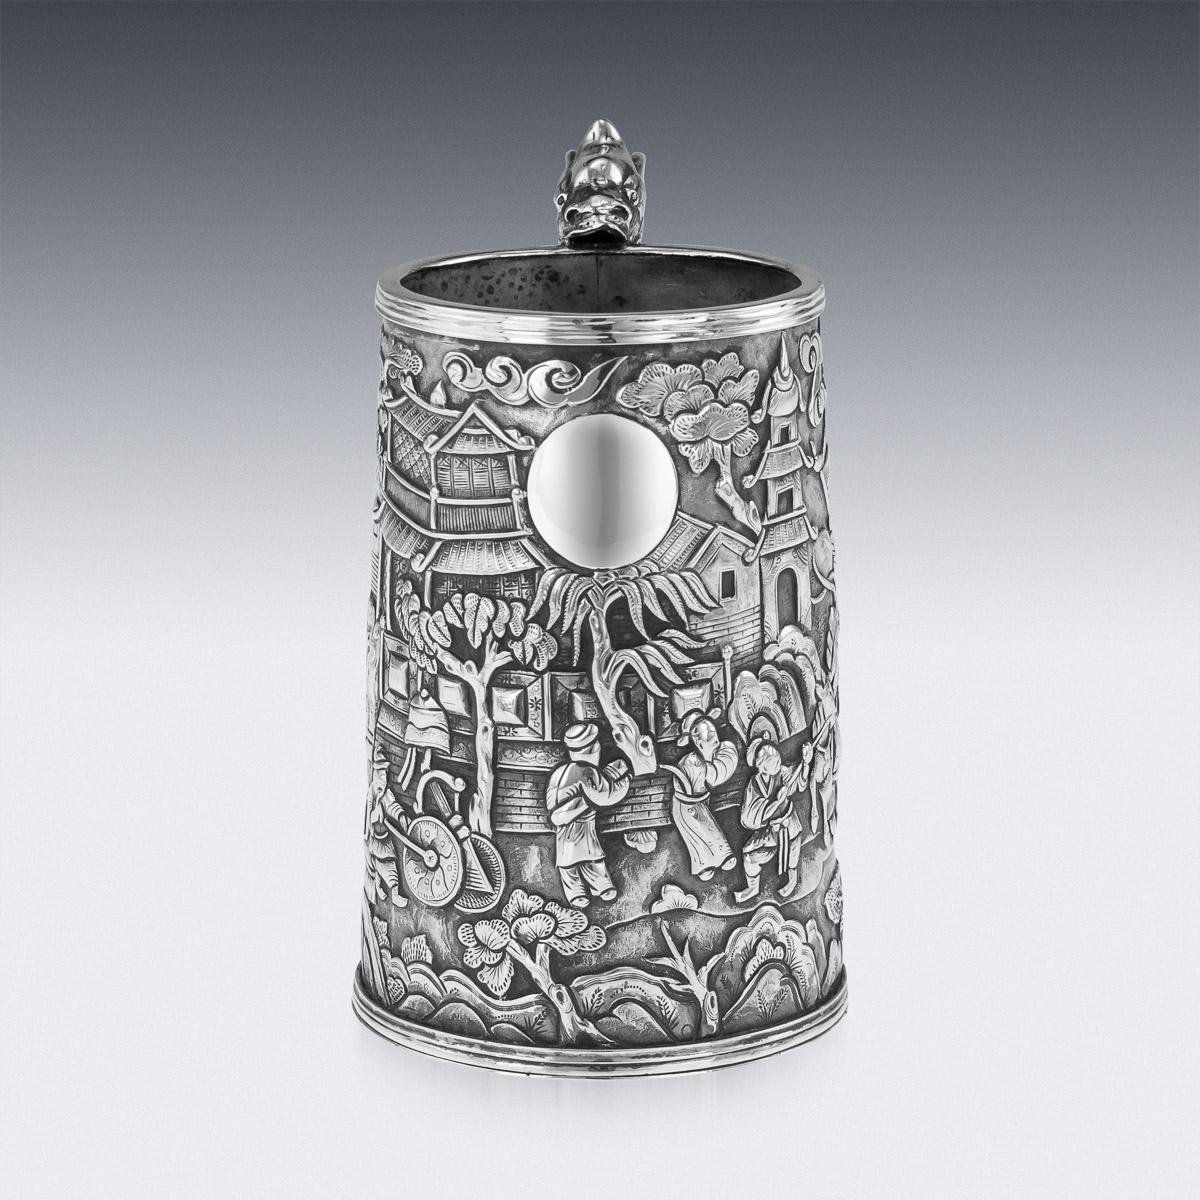 Antique 19th Century Chinese export solid silver mug, of traditional shape and size, the body is embossed with beautiful scenes in relief depicting Chinese warriors and nobility amongst city landscape, double walled, the front centering with an